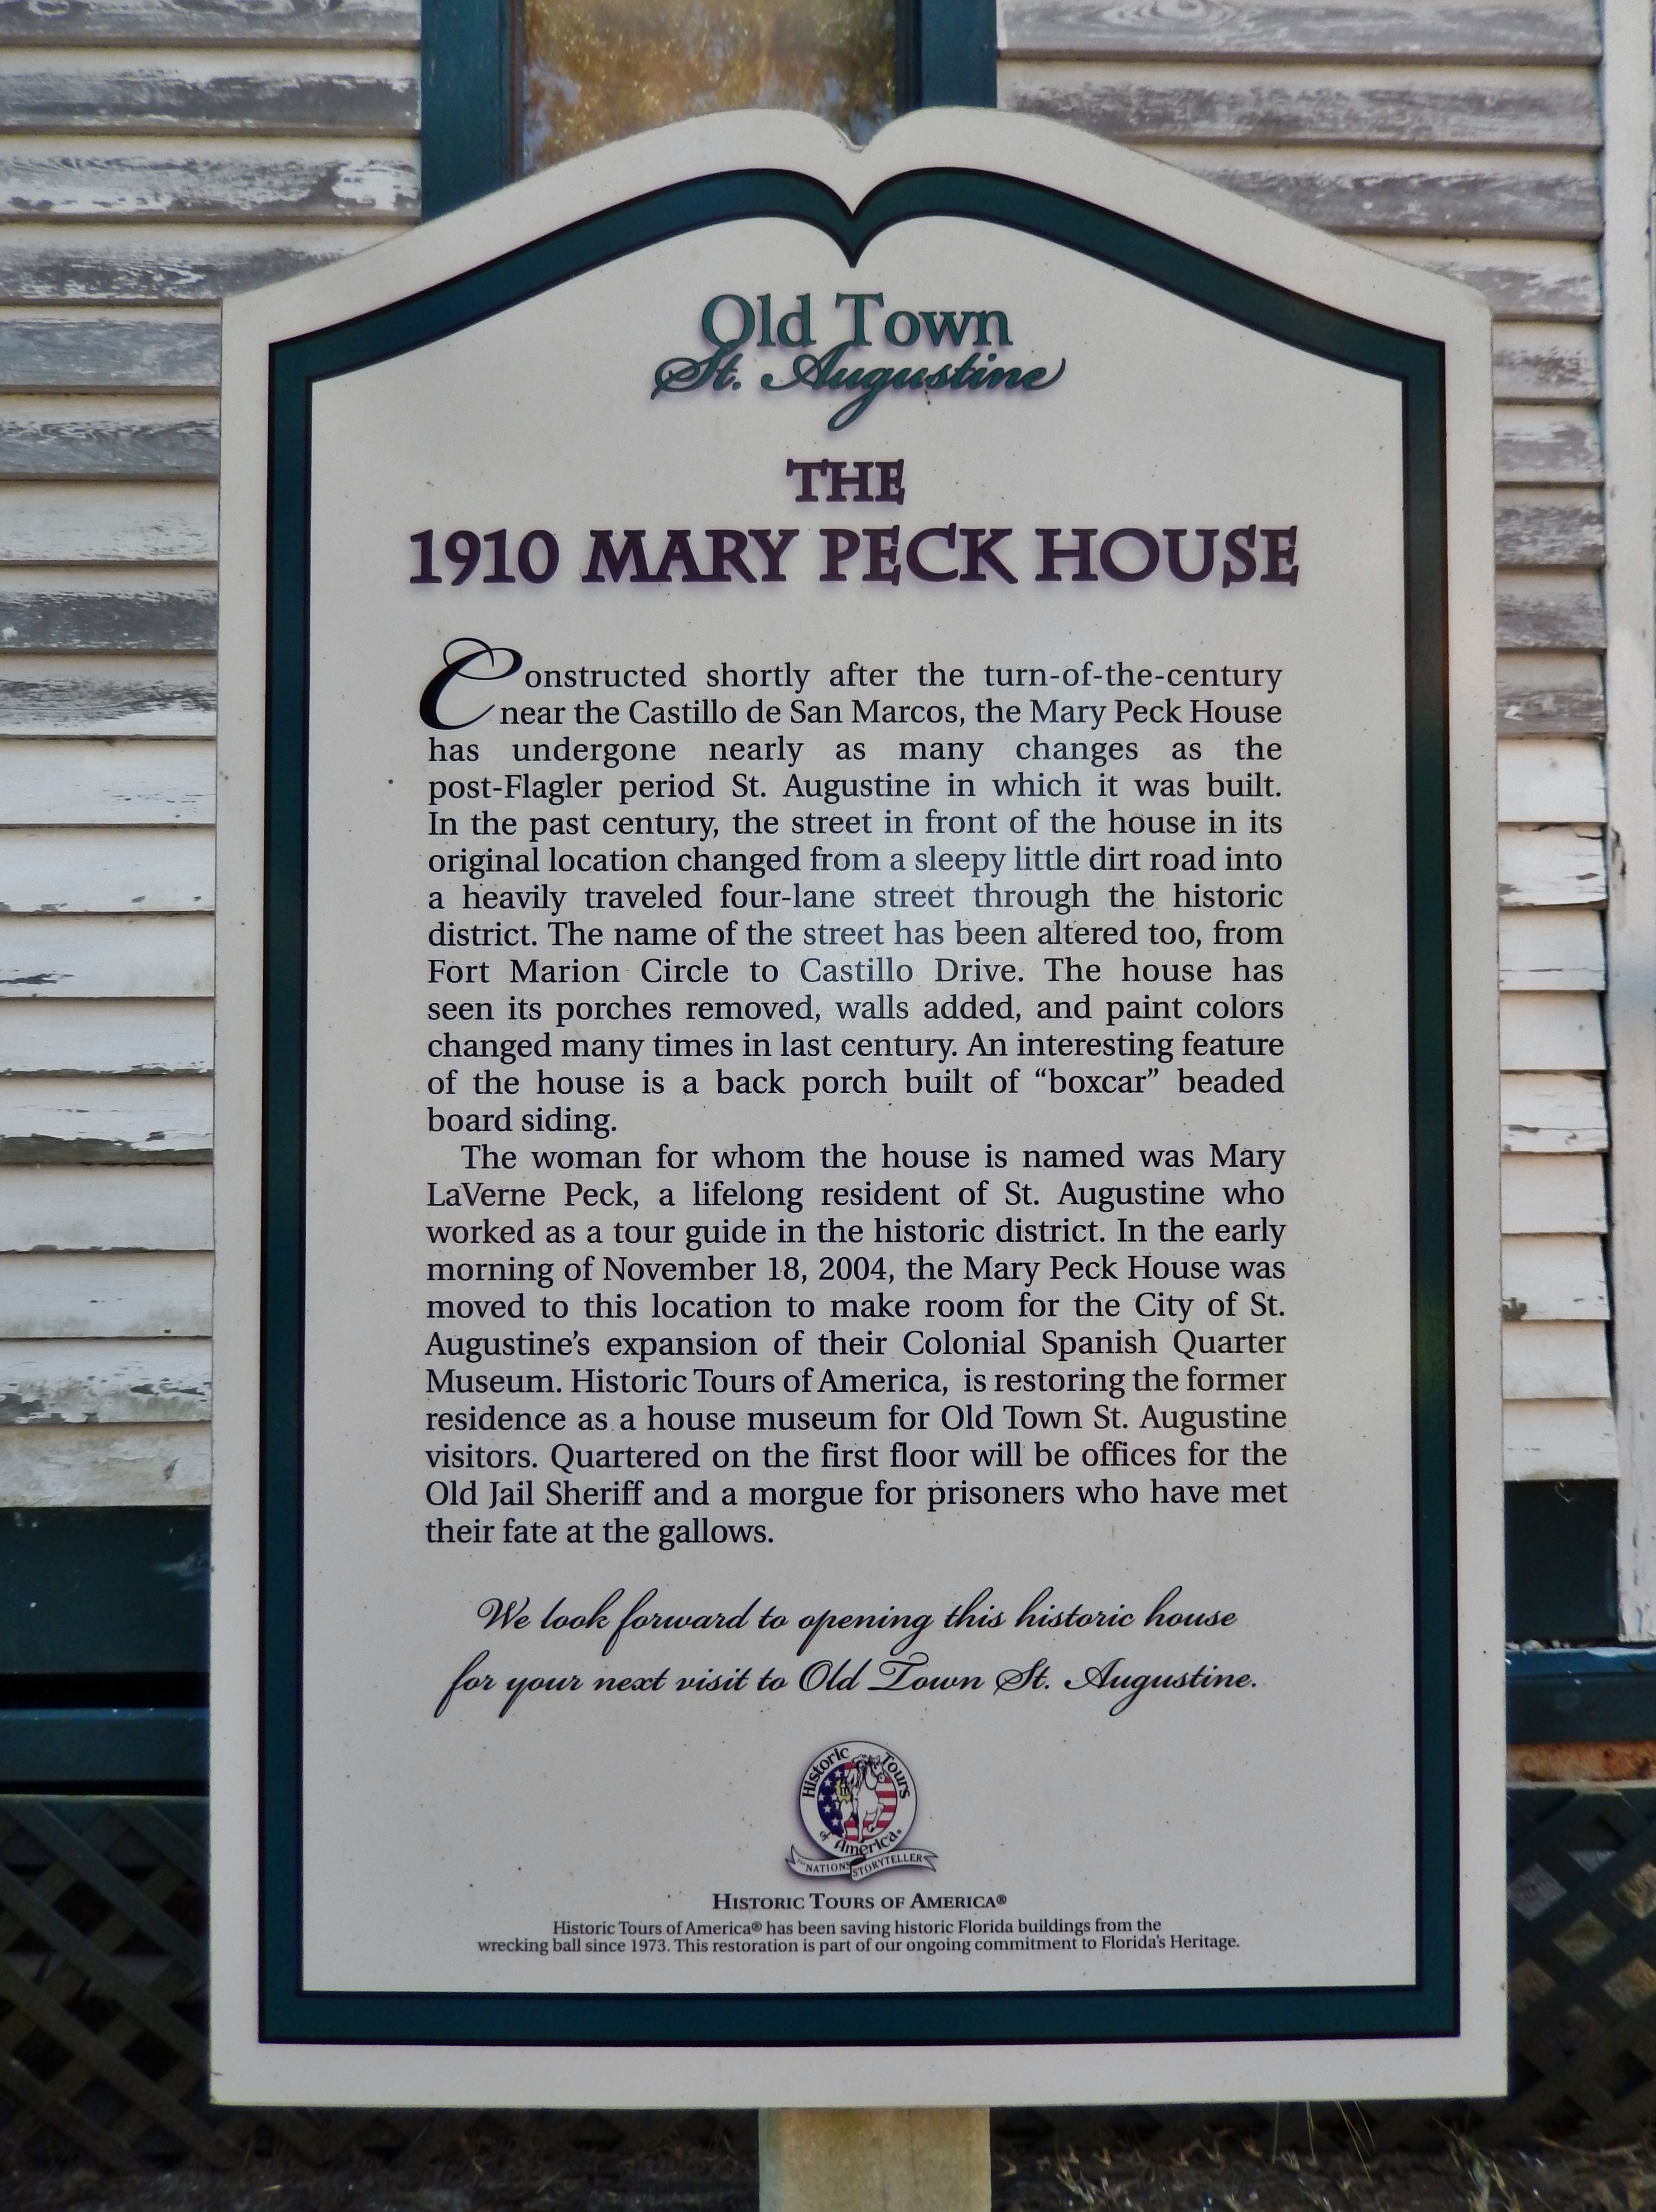 The 1910 Mary Peck House Marker